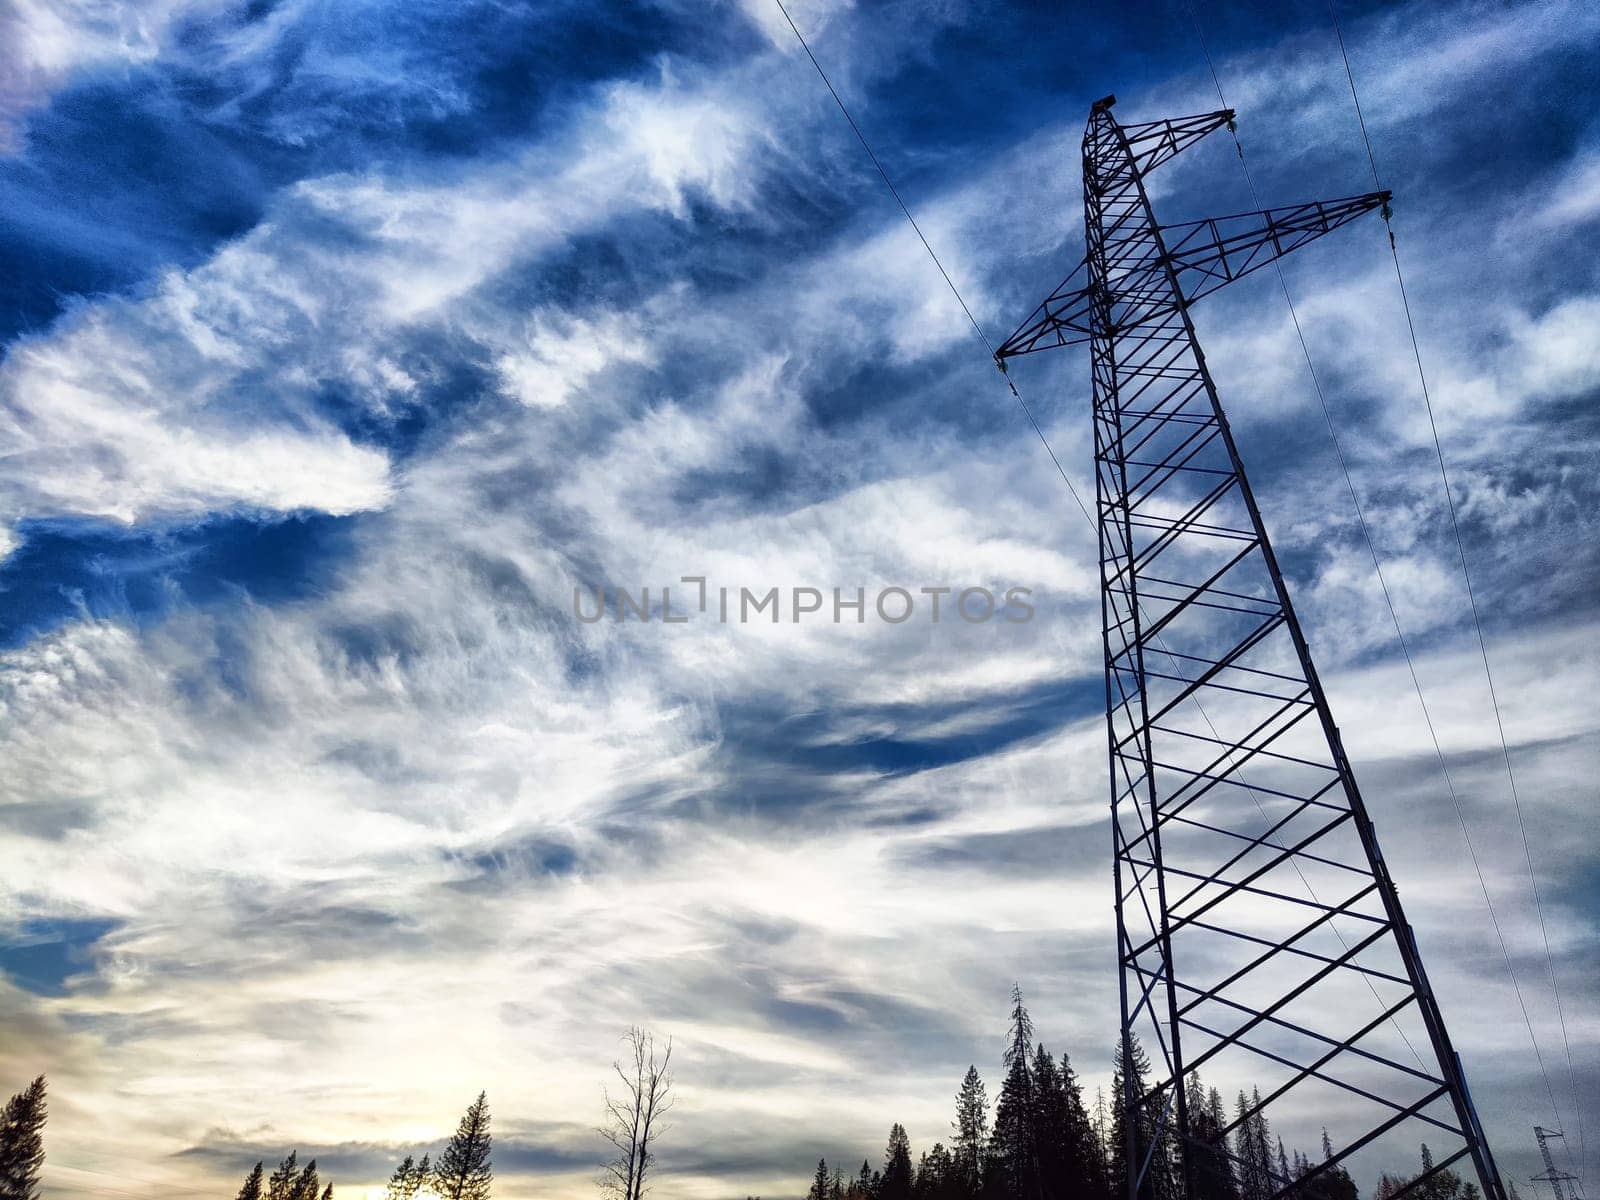 Power lines on a hill, hill or in the mountains against a blue sky with white clouds. Electric lines, towers, wires in nature landscape